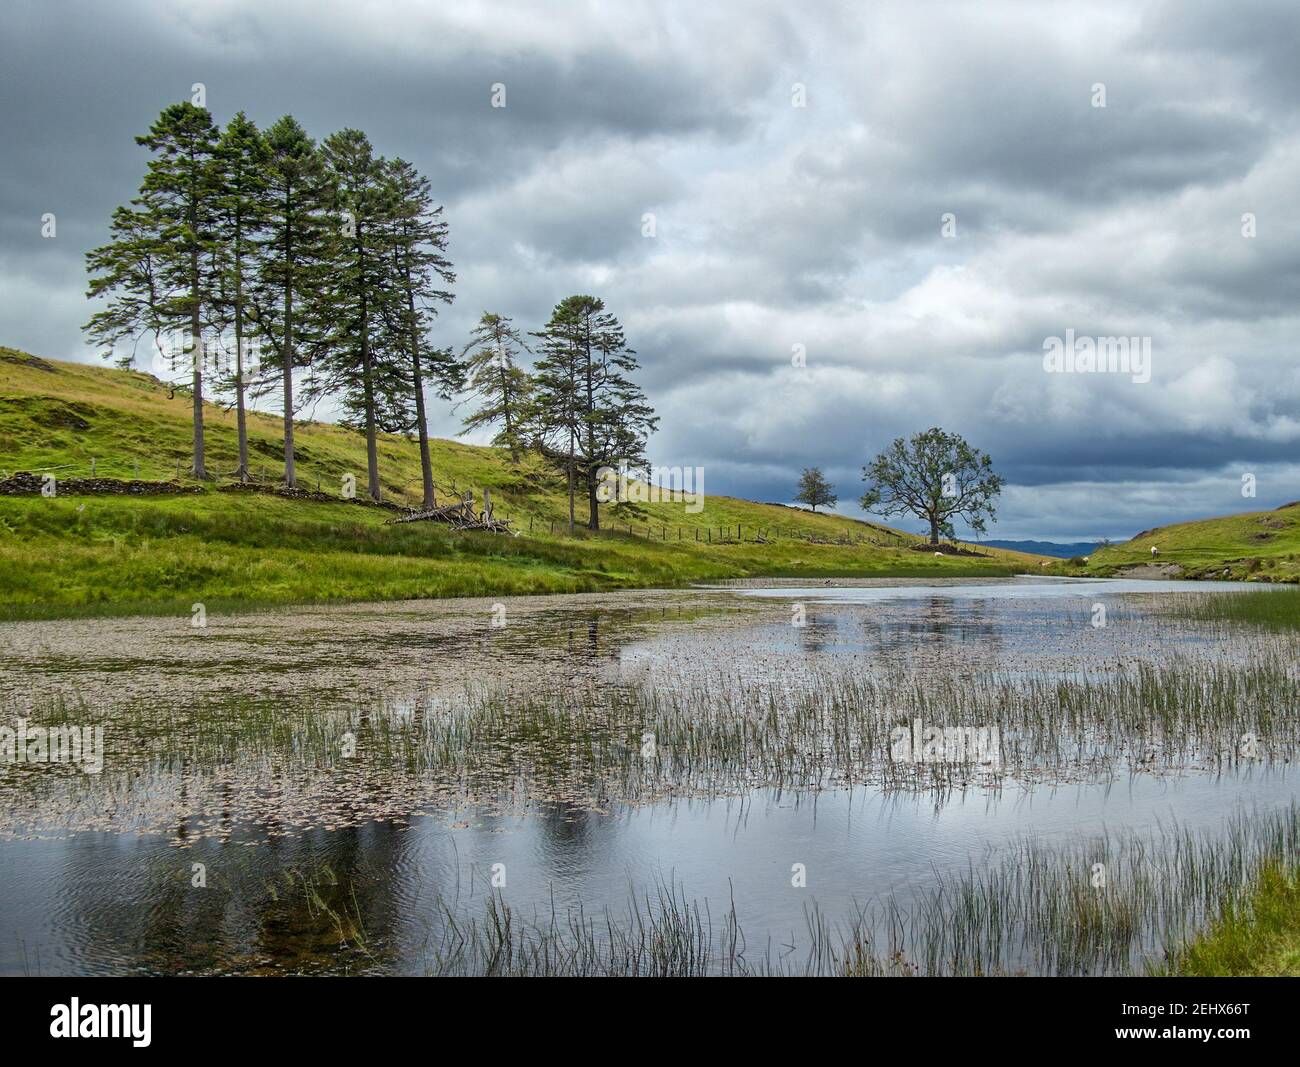 A view of School Knot Tarn: a small body of water in the English Lake District Stock Photo